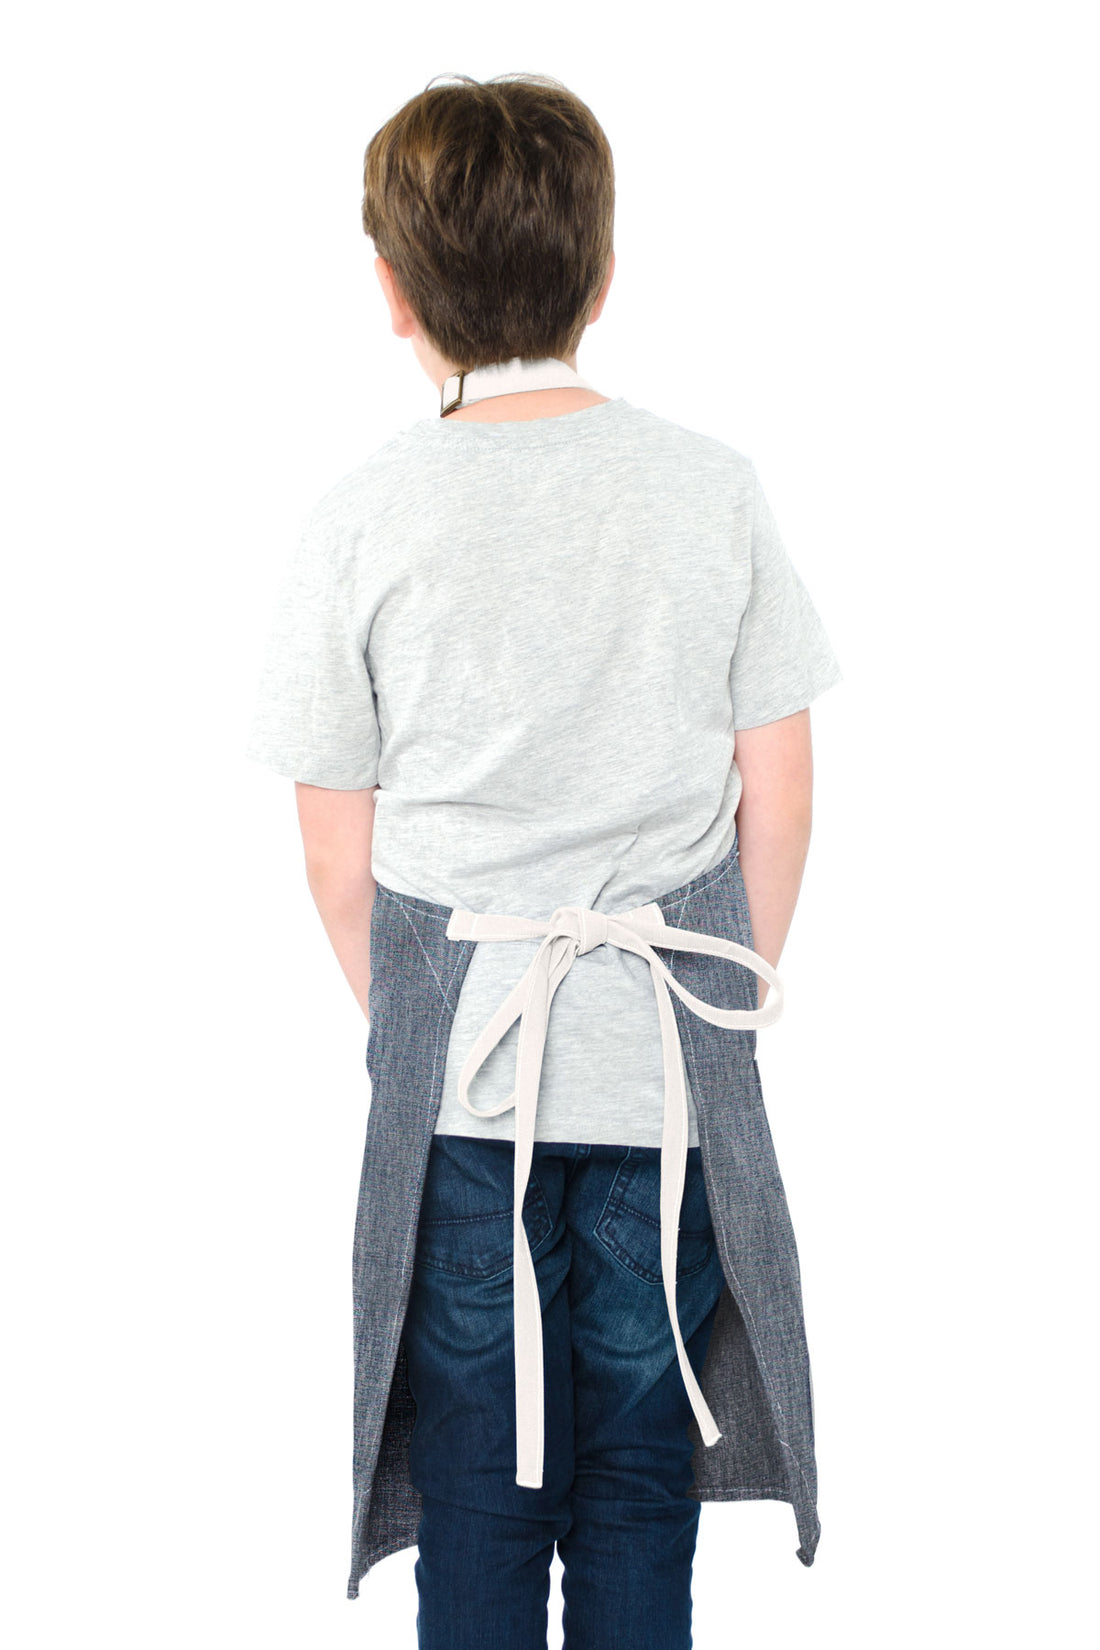 Lucca Kids Apron - Chambray